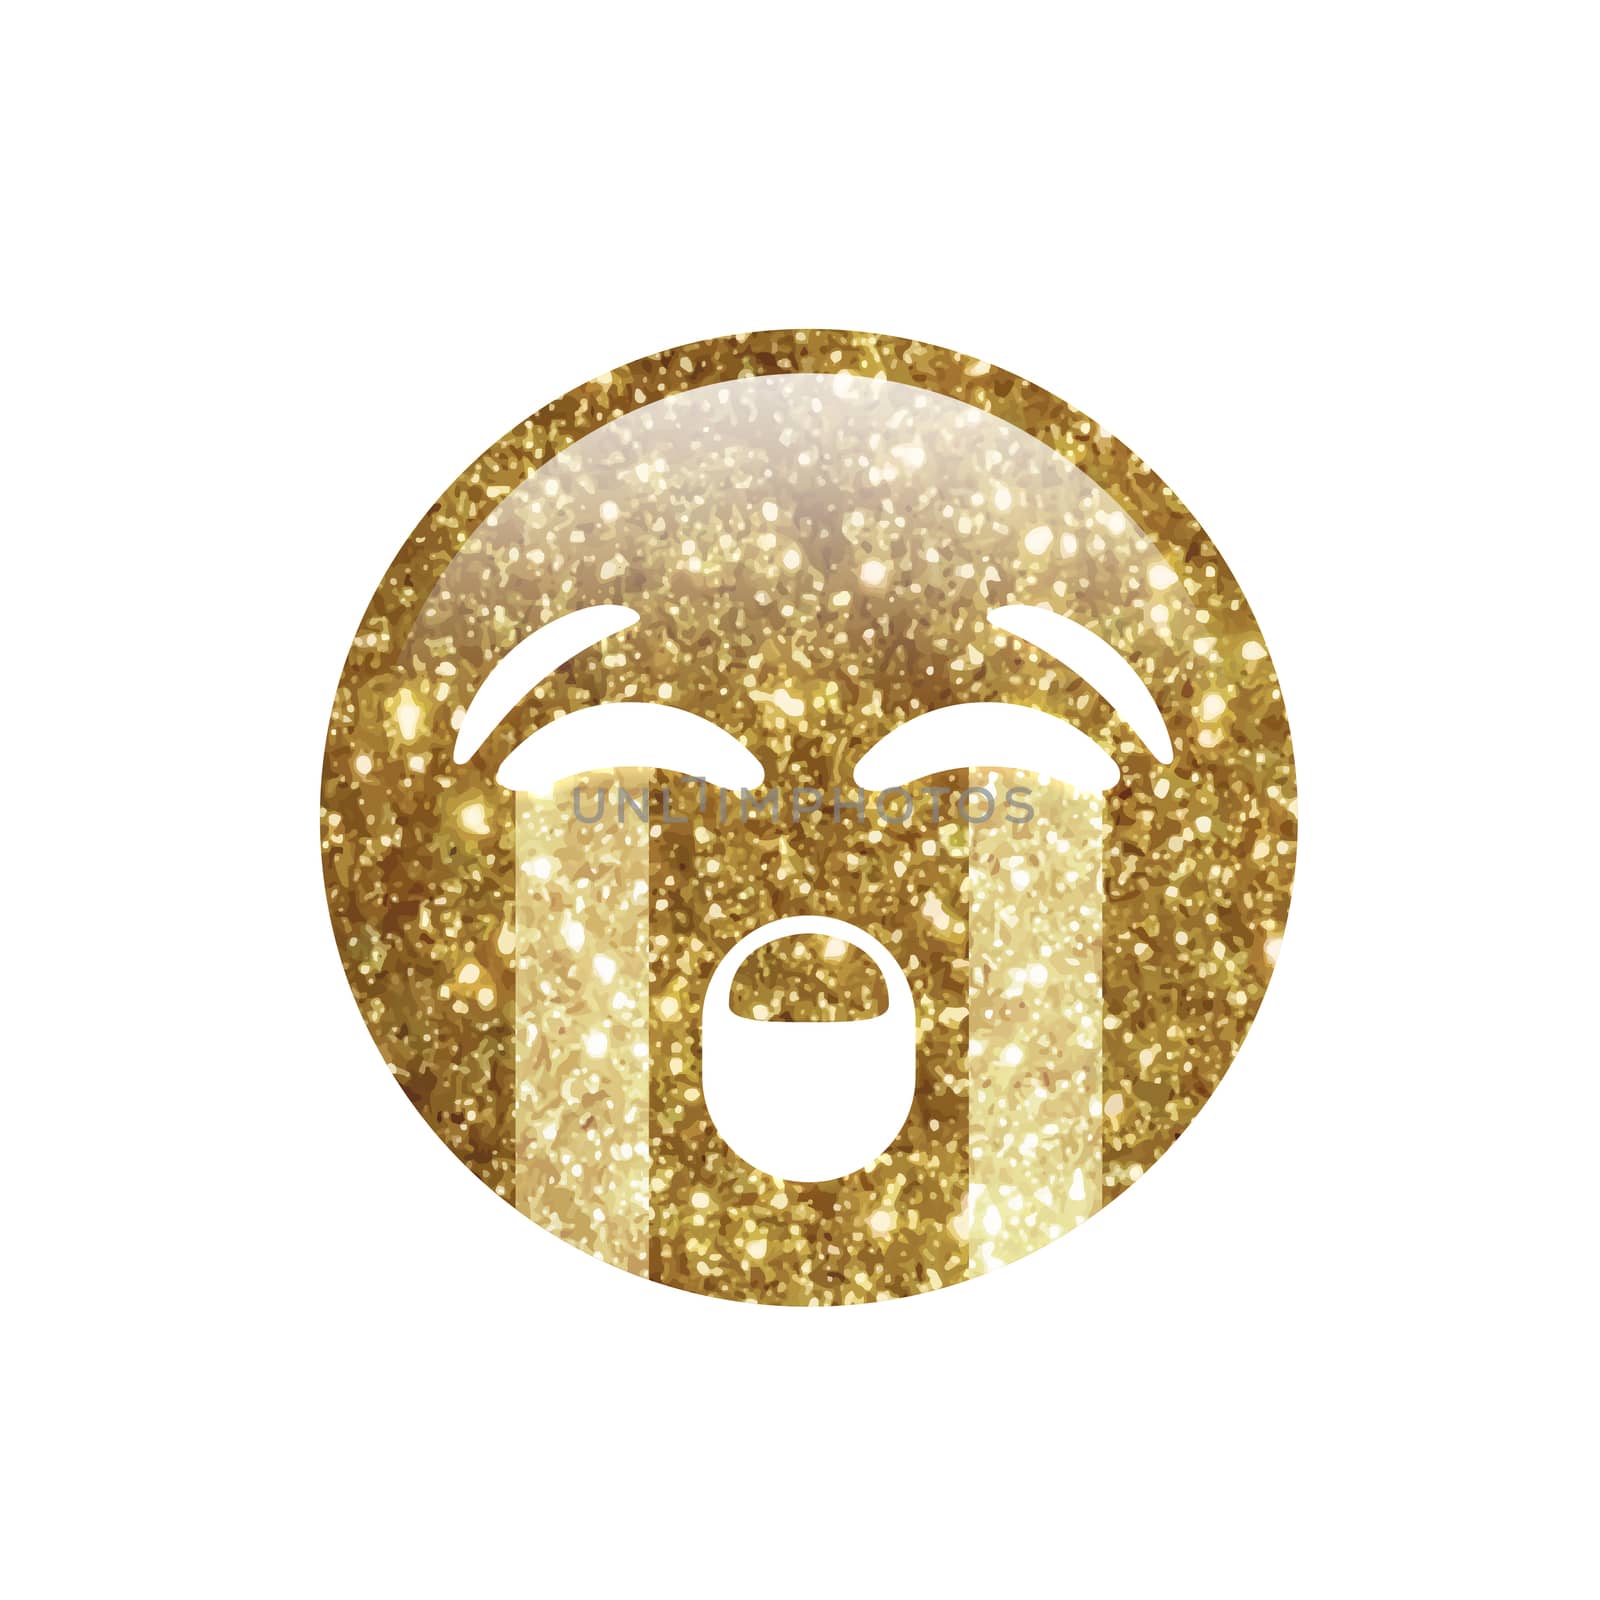 The Golden glitter emoji sad face with crying tear icon